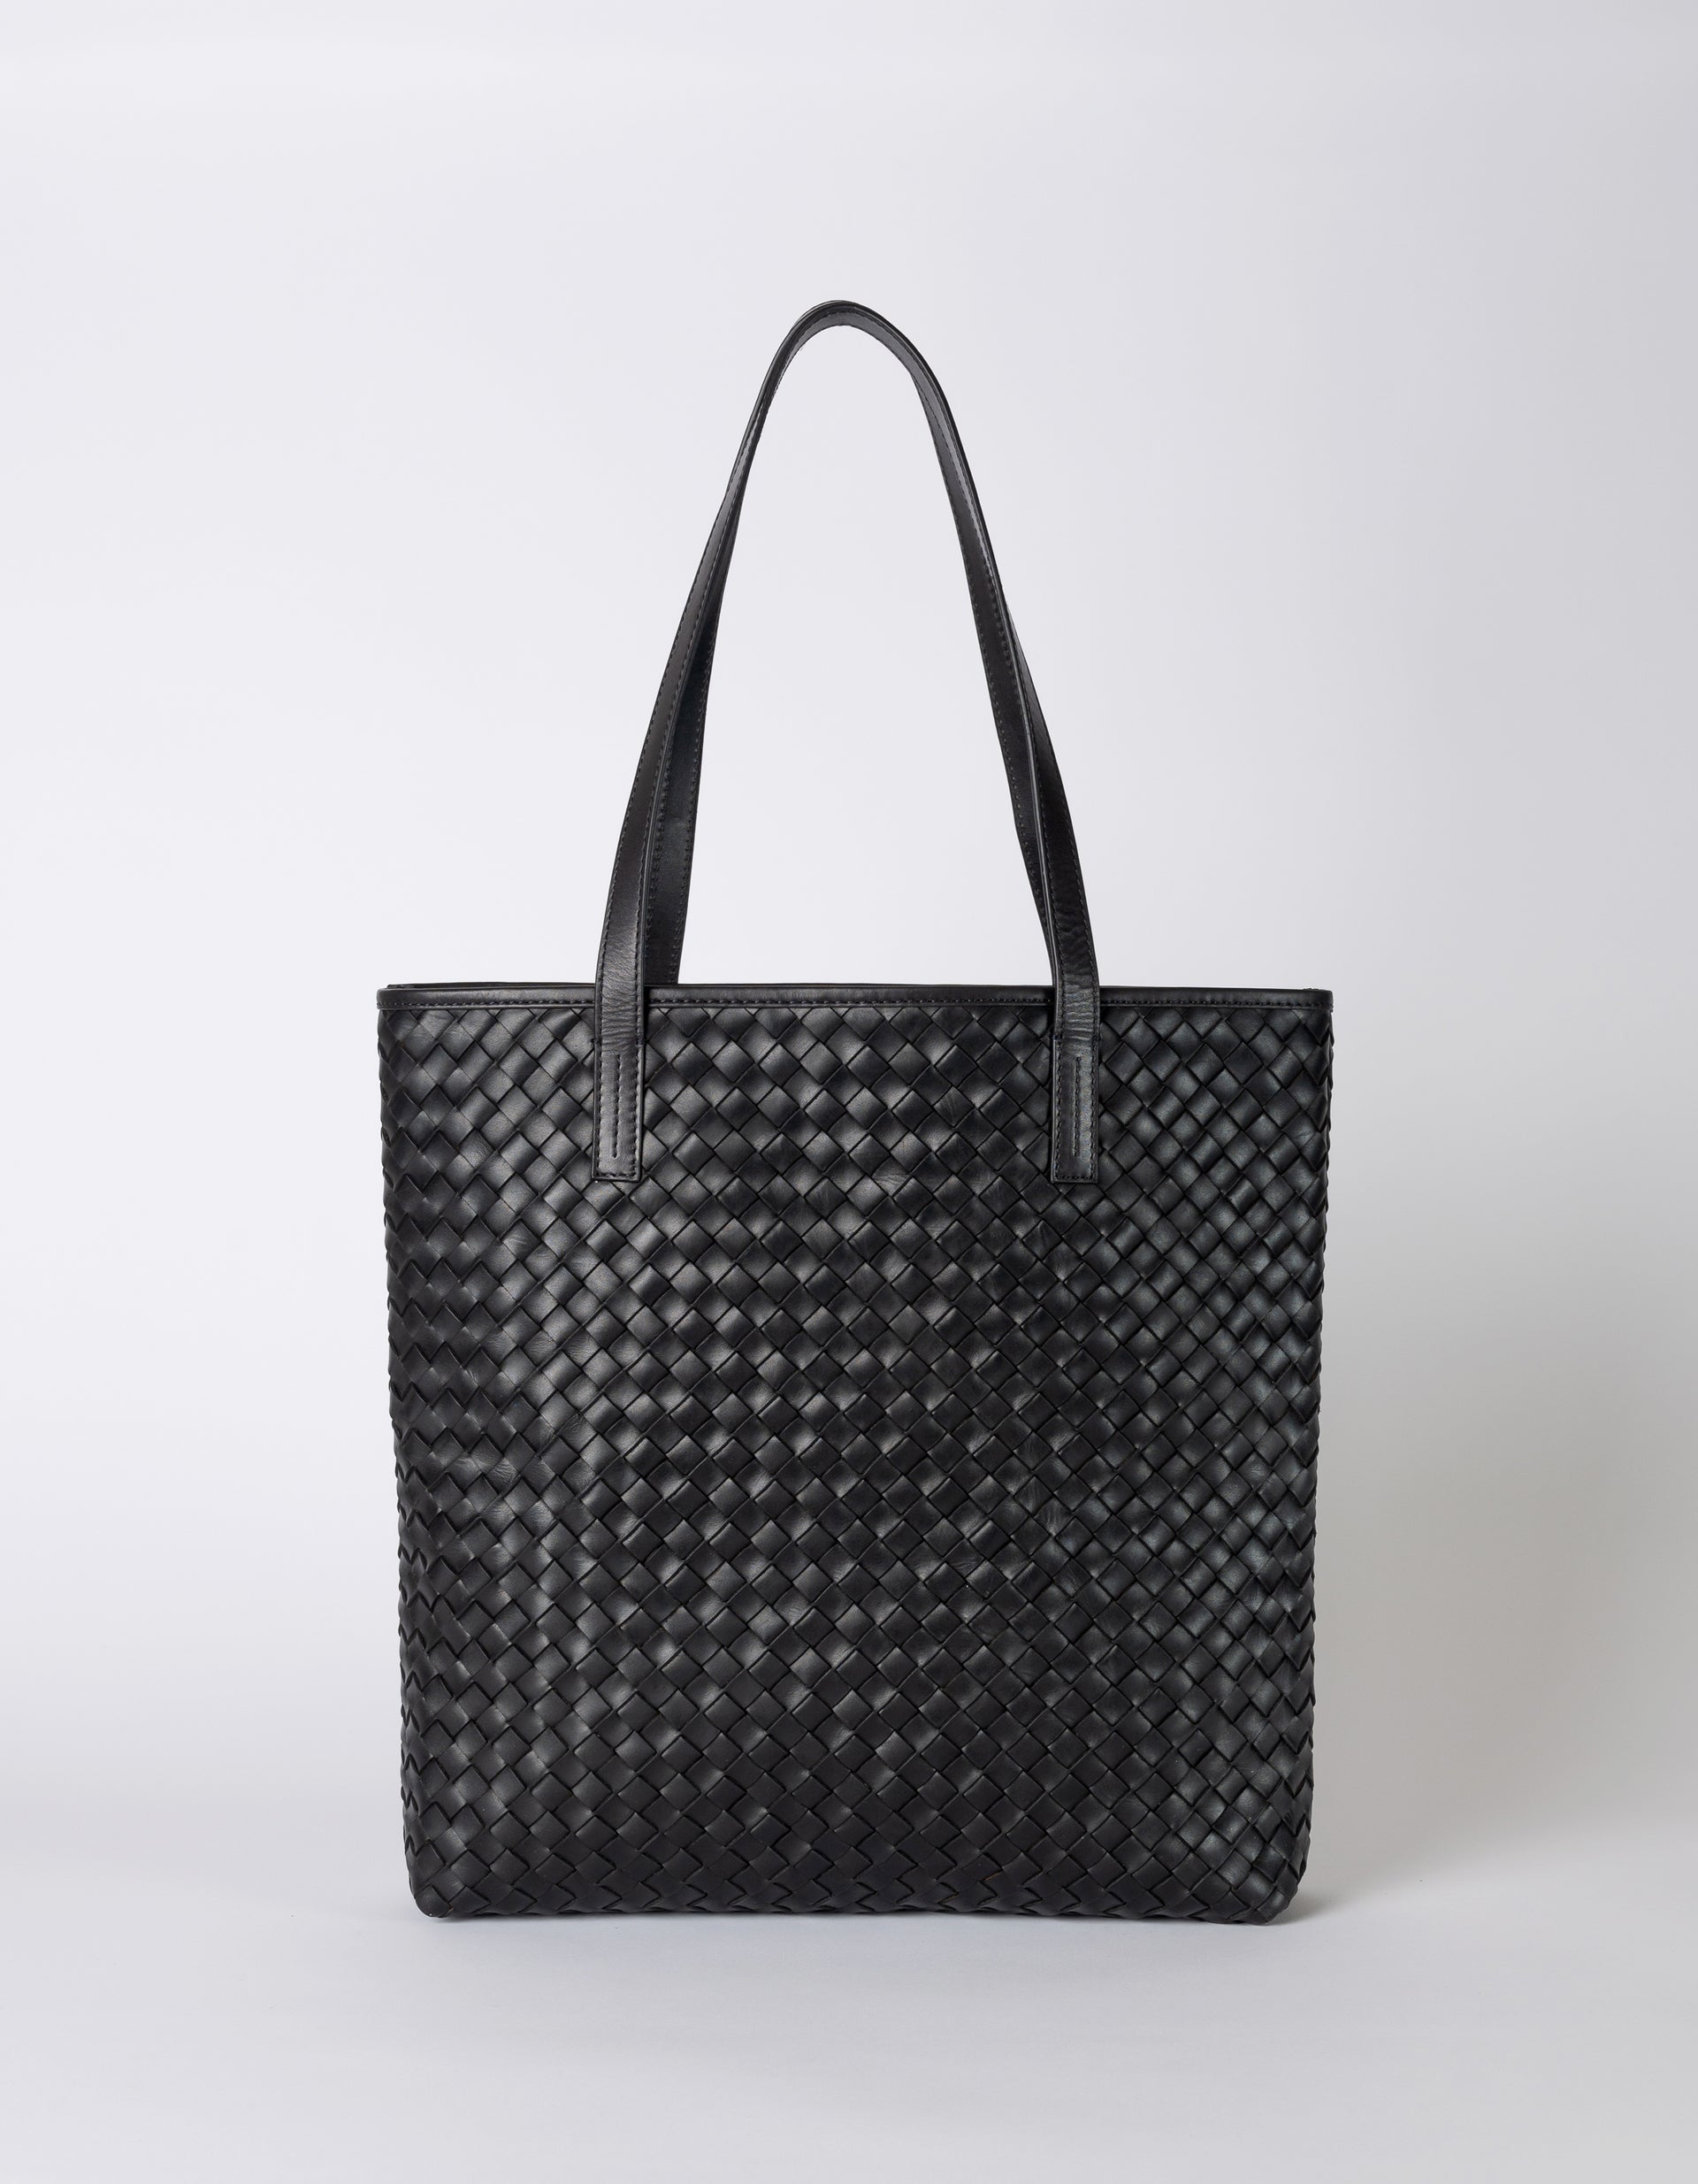 Georgia tote in black woven leather, back view